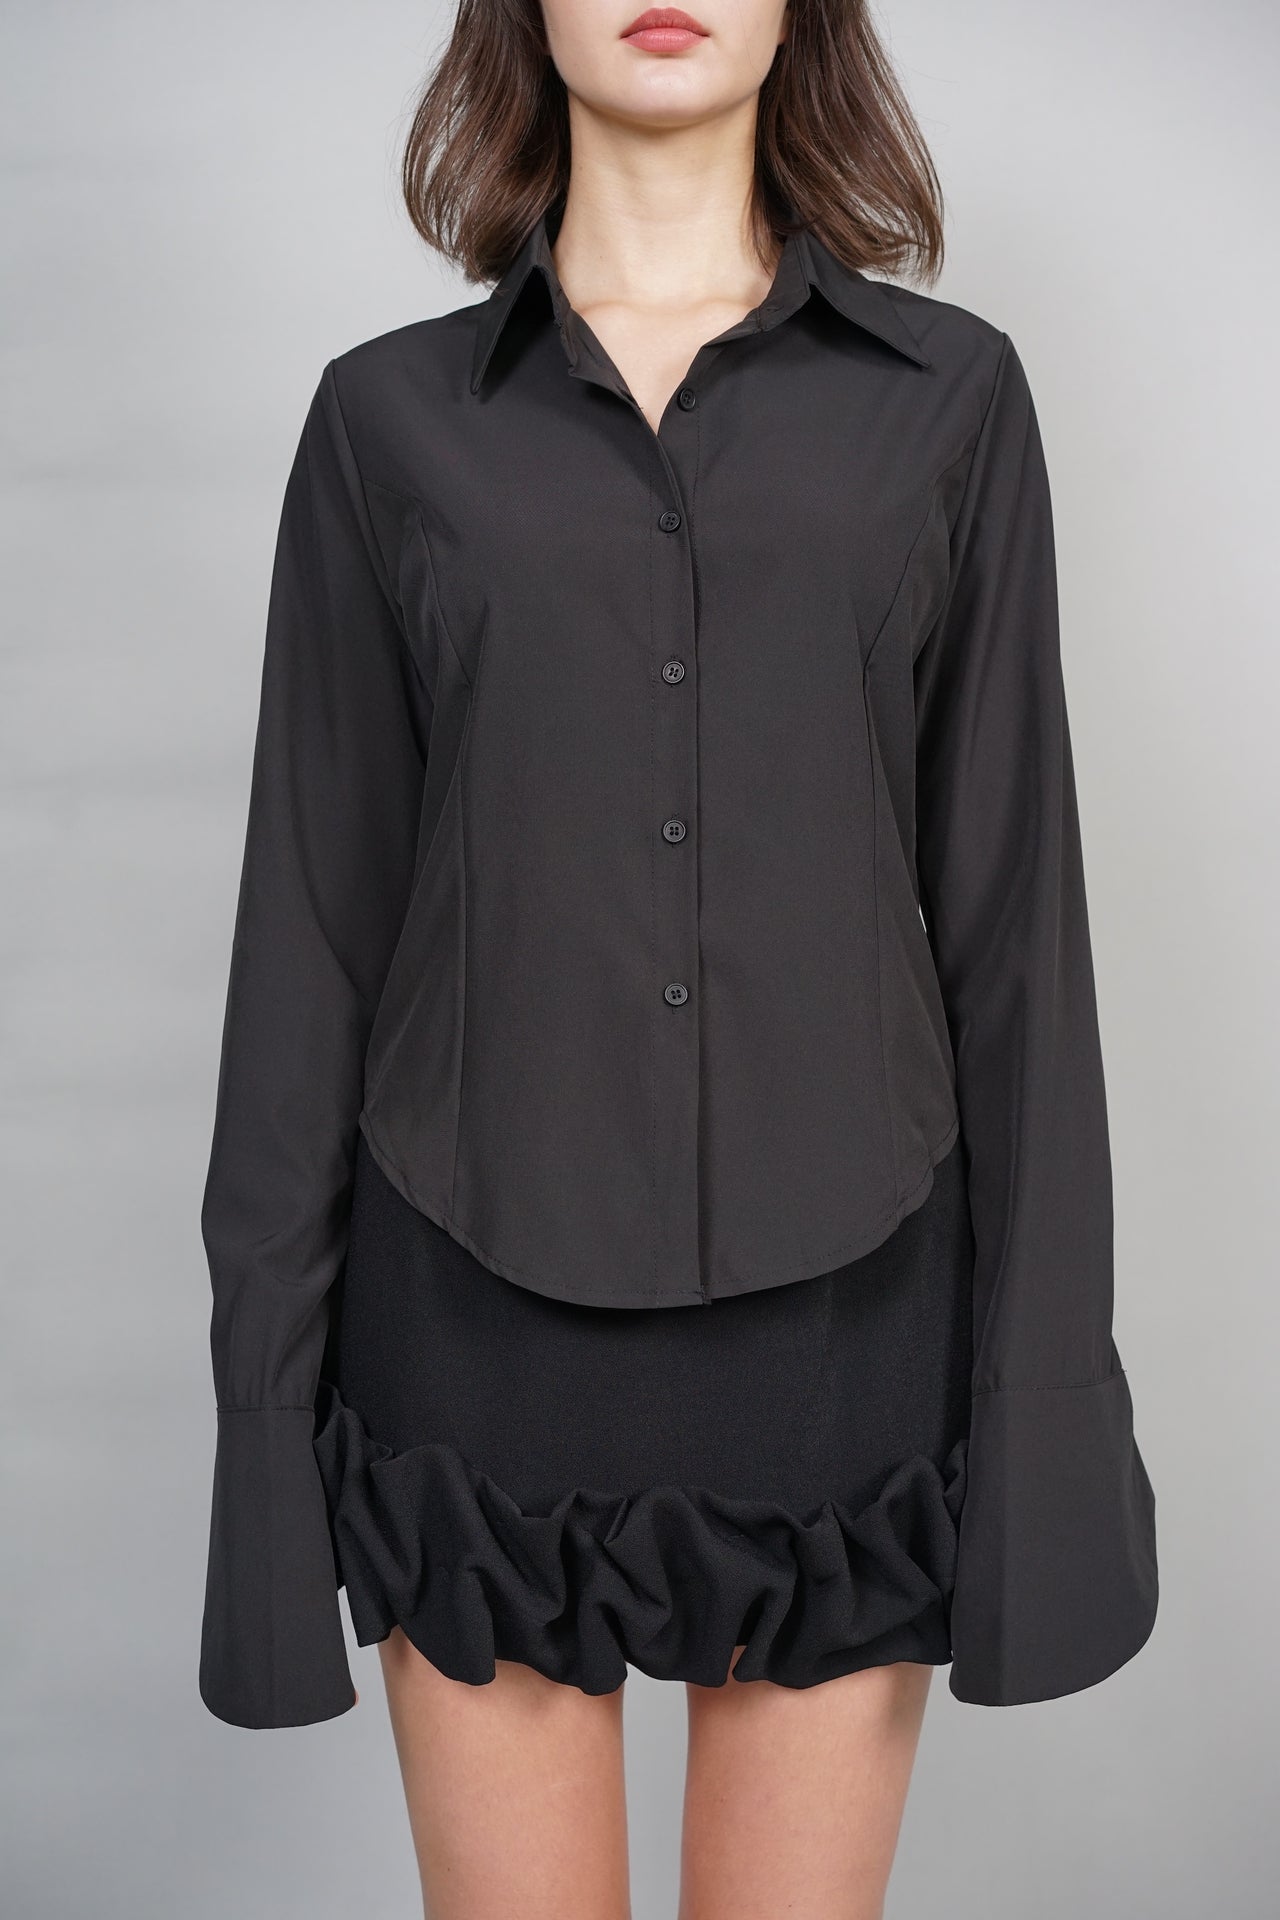 EVERYDAY / Trinity Buttoned Top in Black